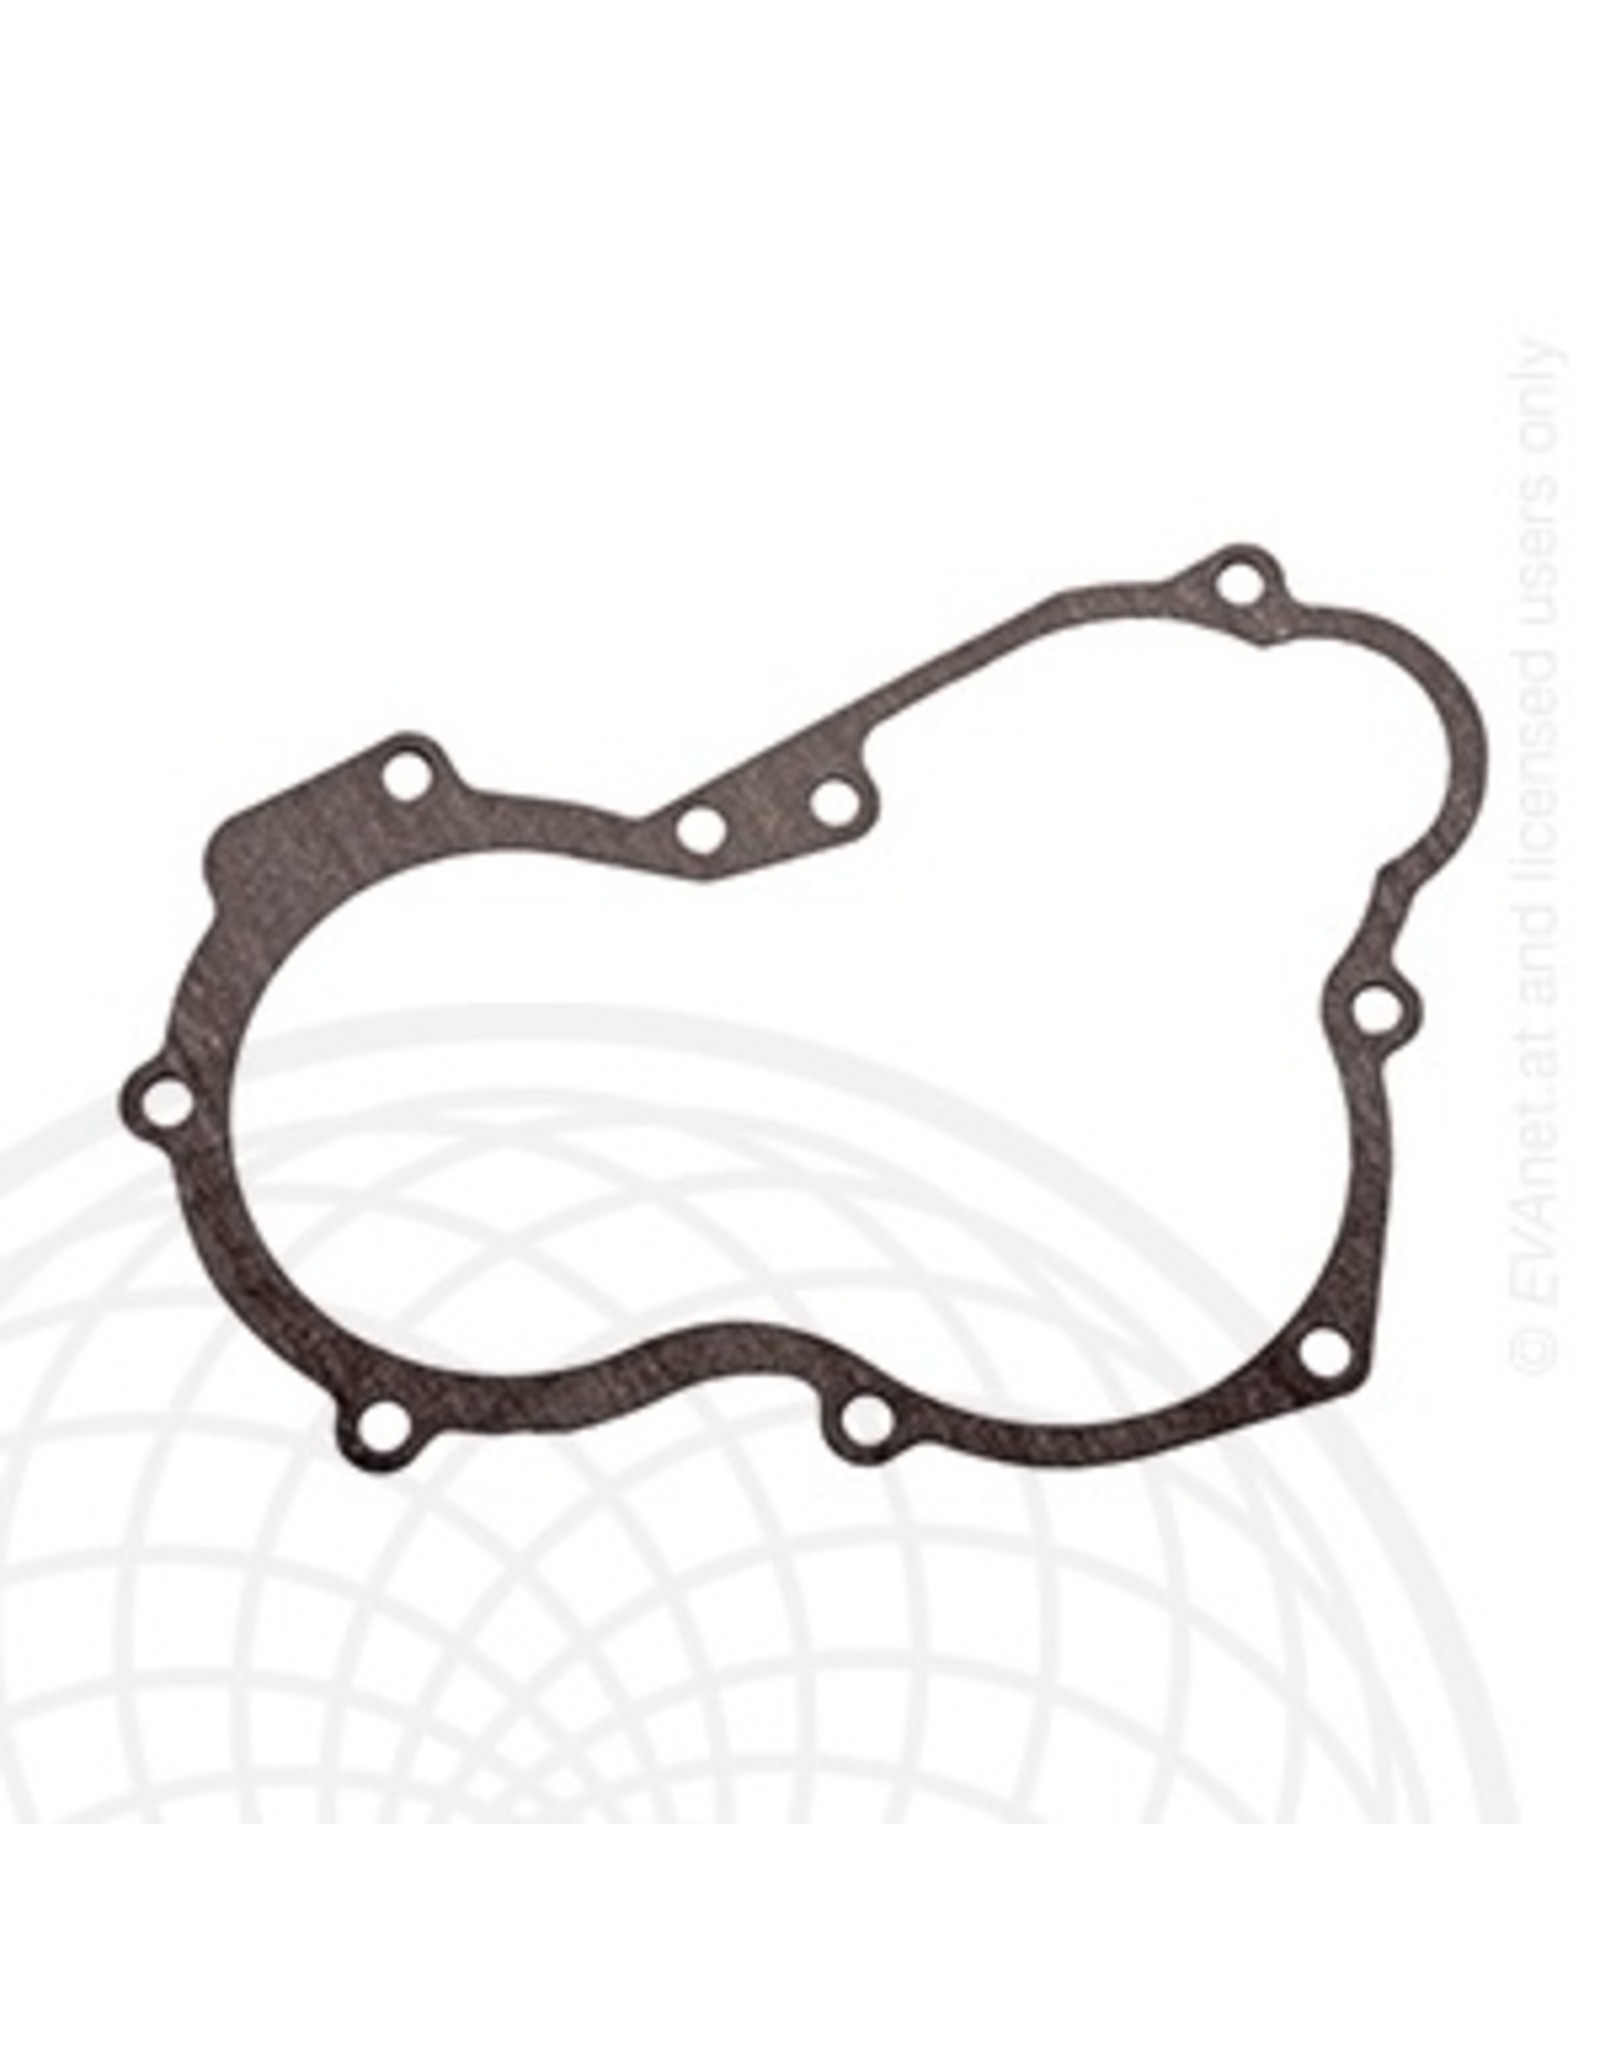 Rotax Max Rotax max HAND SIDE COVER GASKET